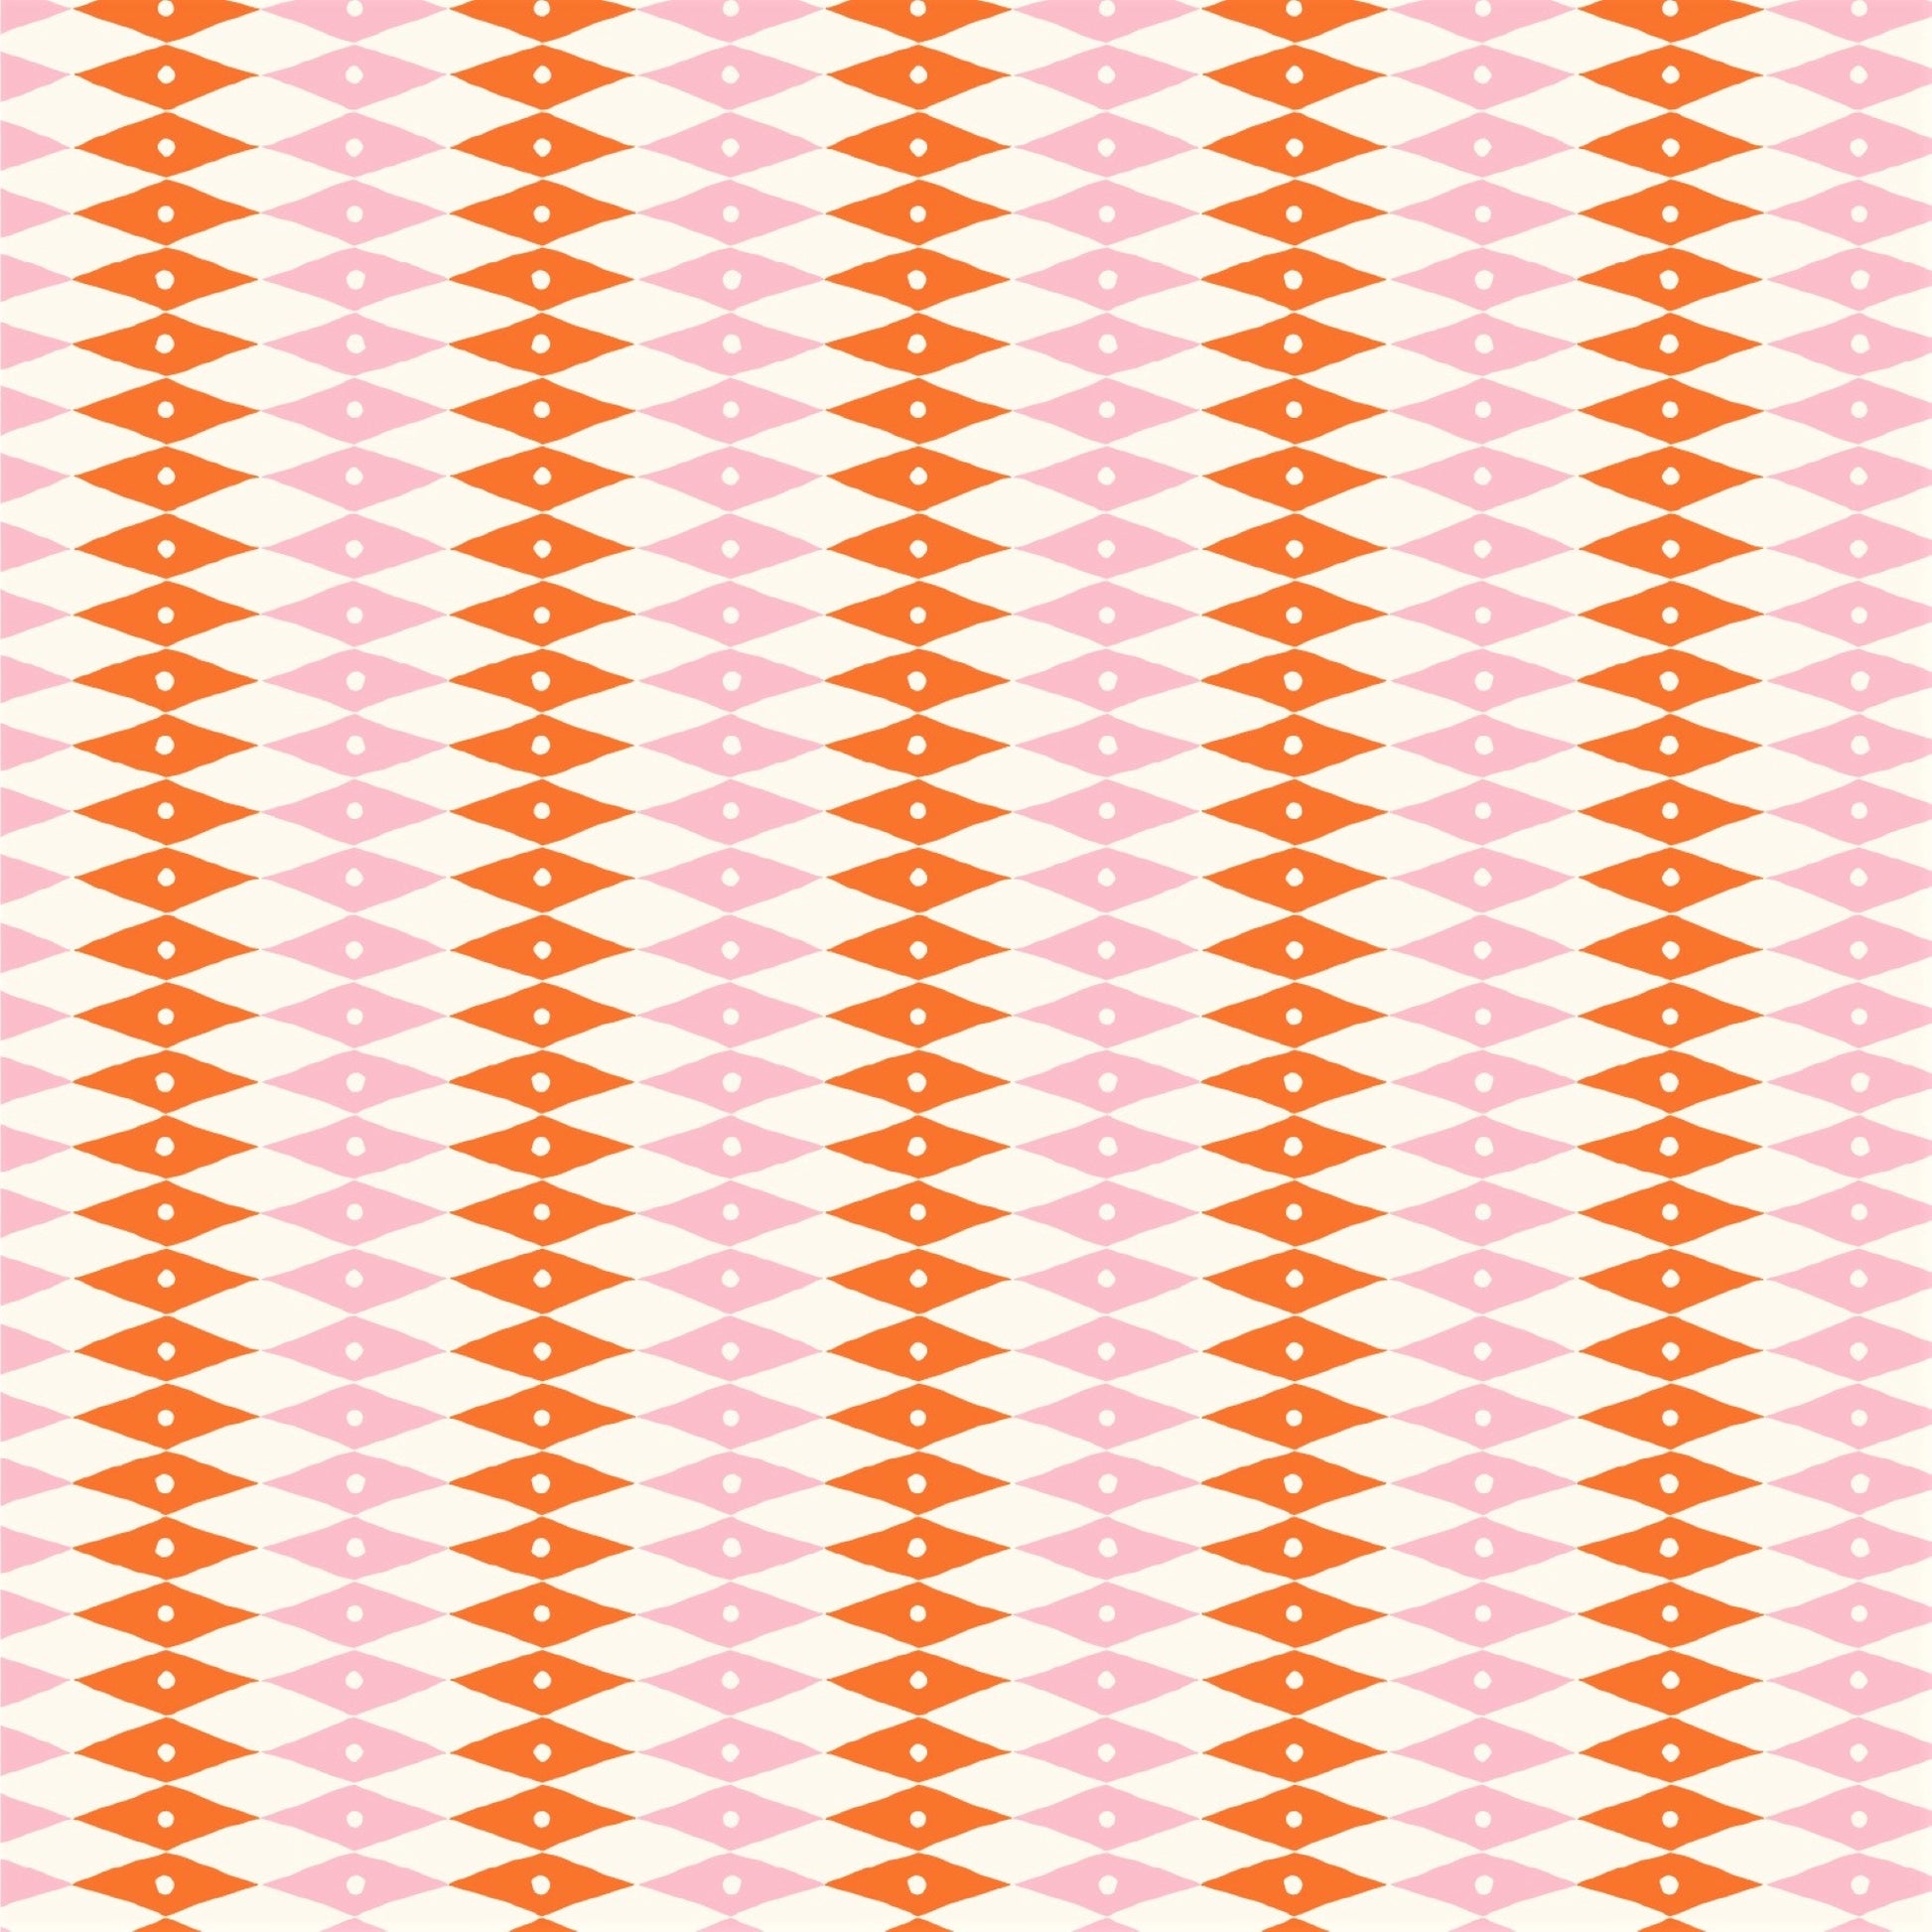 harlequin diamond design patterned paper gift wrap in pink and orange, by Ariana Martin